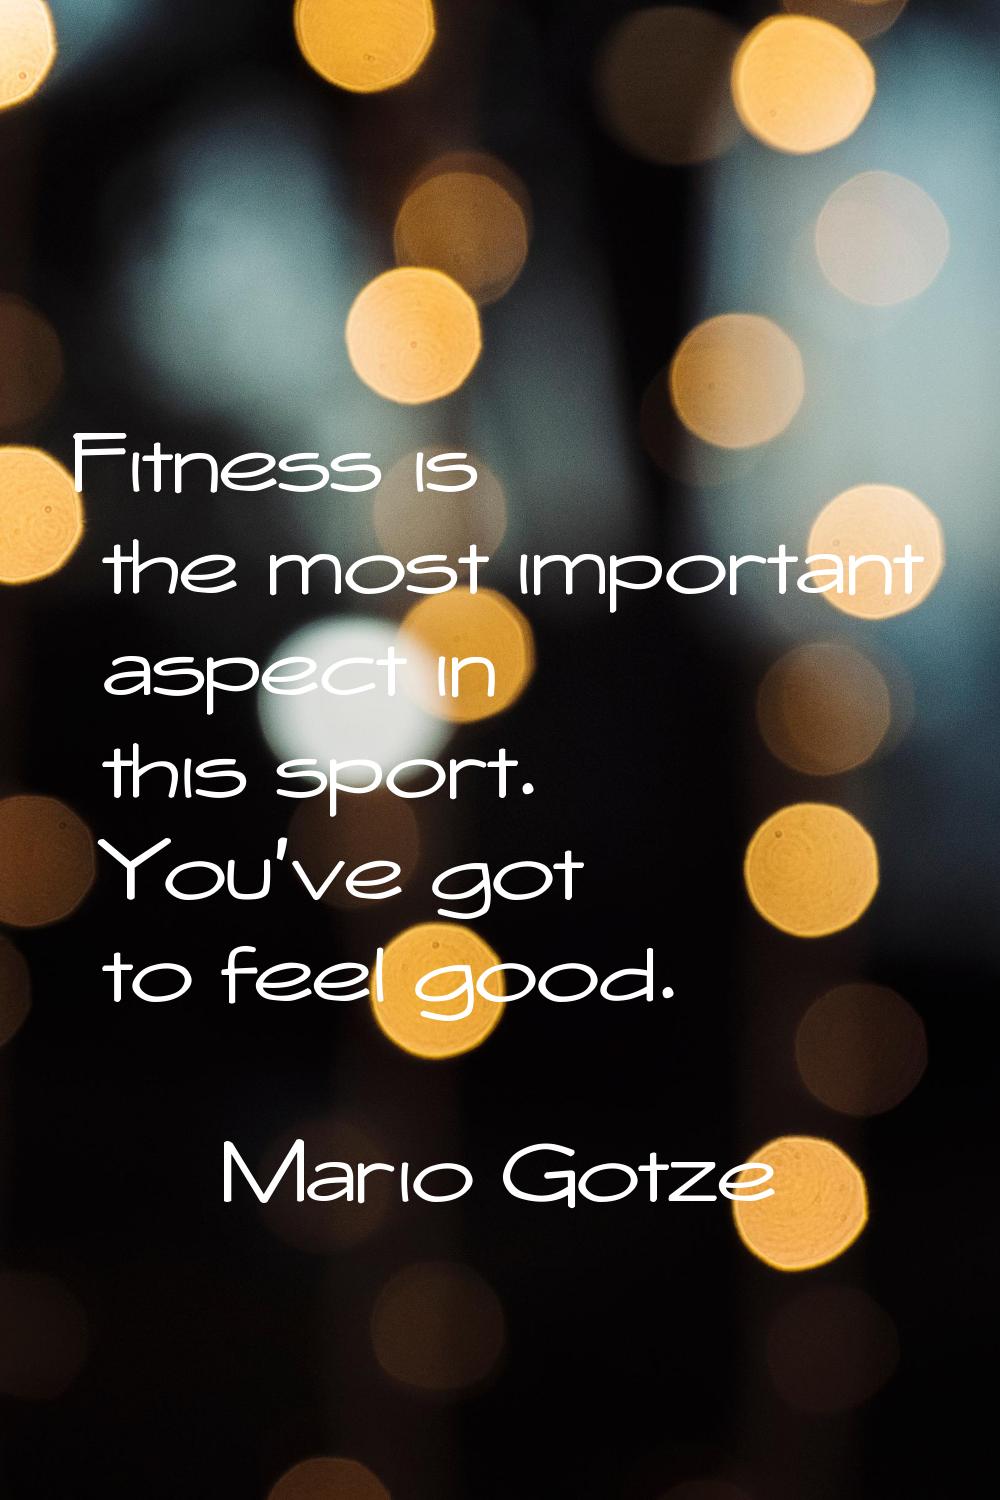 Fitness is the most important aspect in this sport. You've got to feel good.